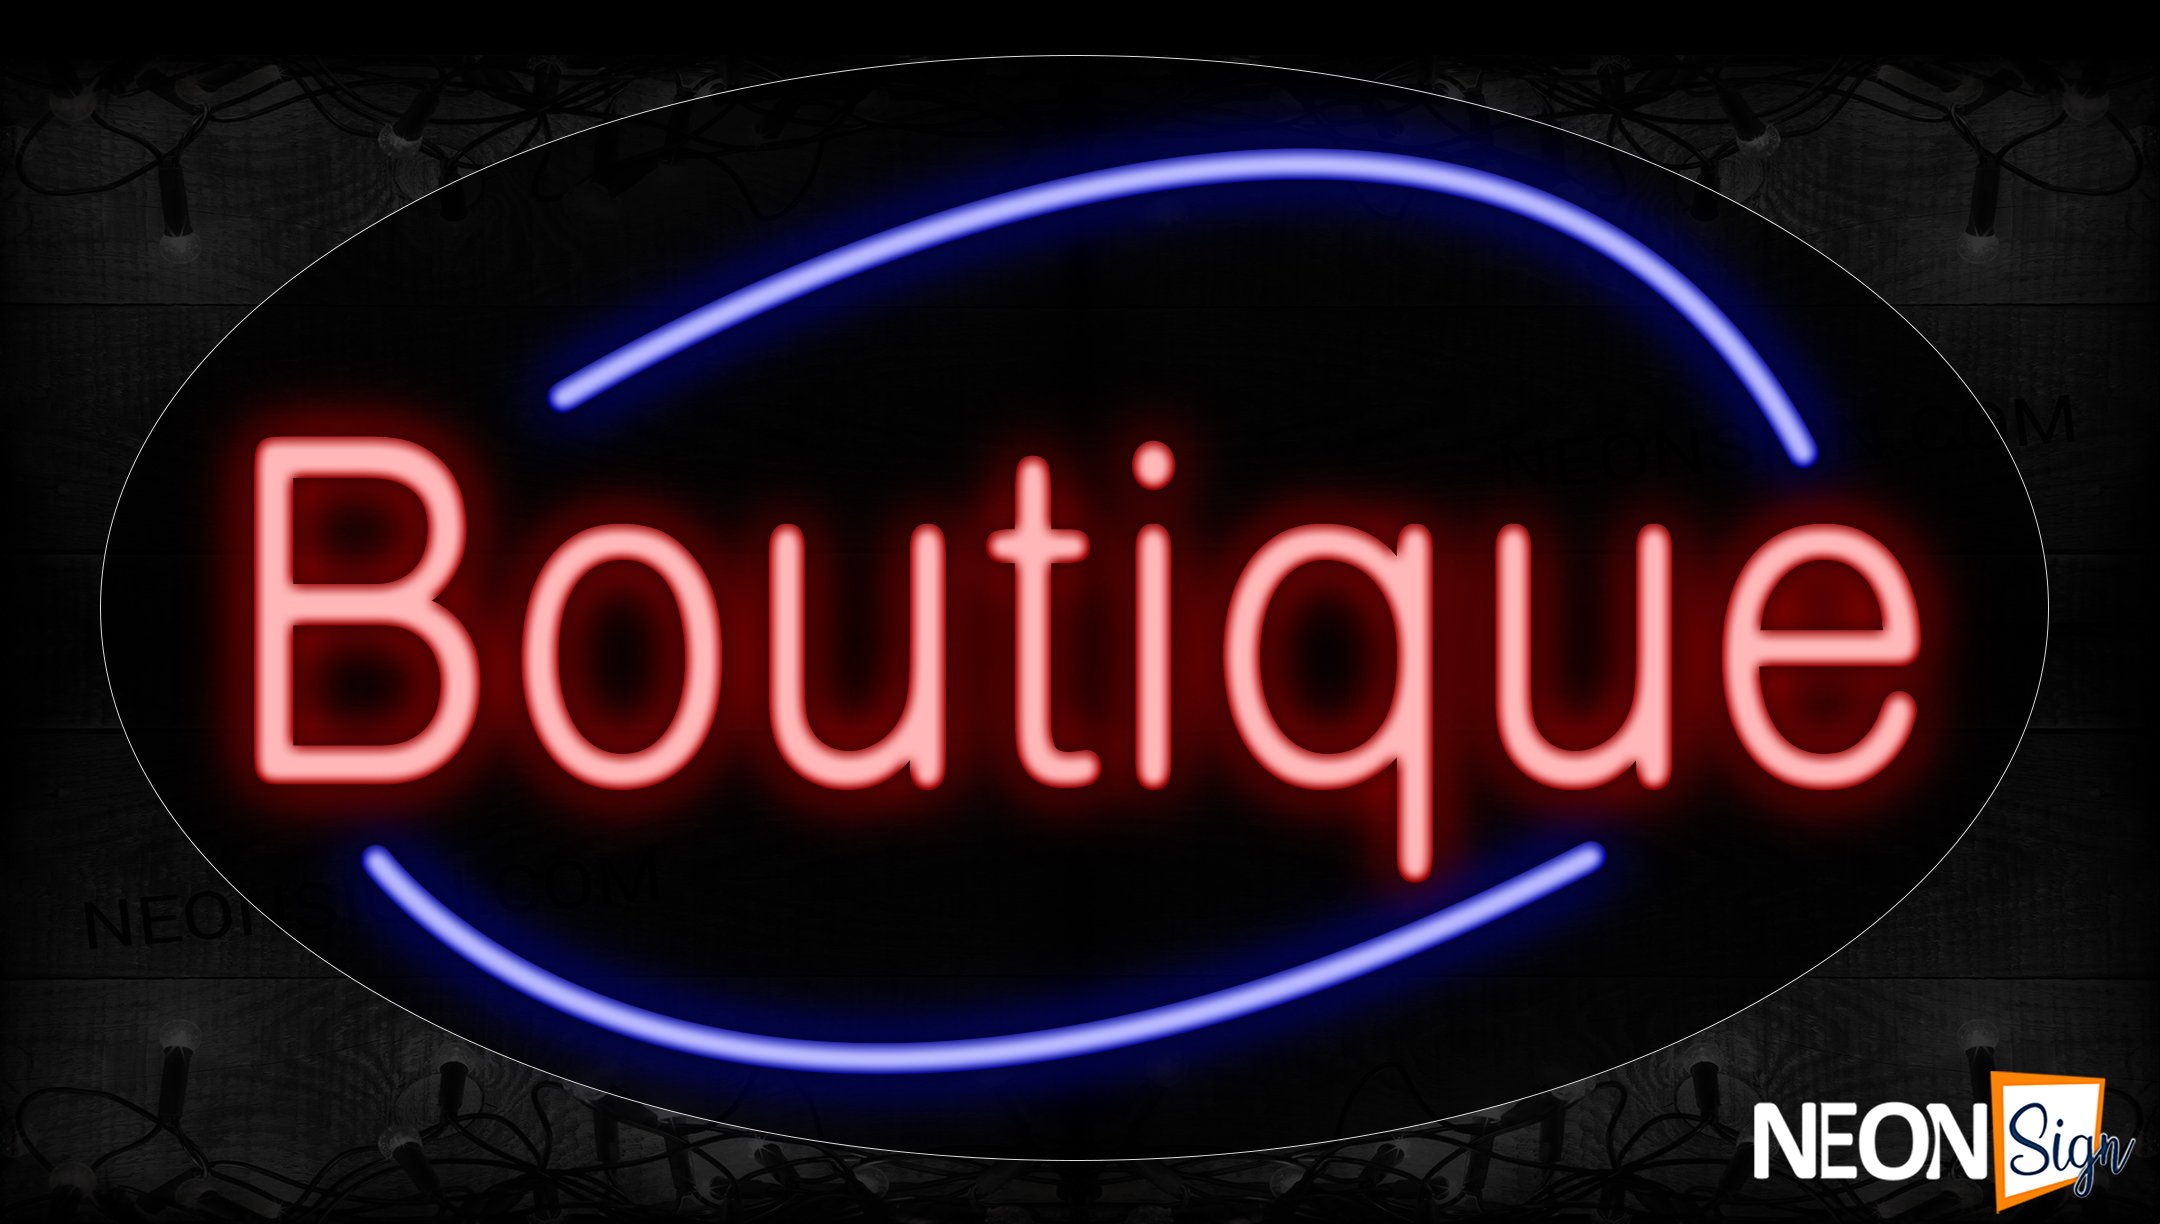 Image of 14572 Boutique With Blue Arc Border Neon Signs_17x30 Contoured Black Backing